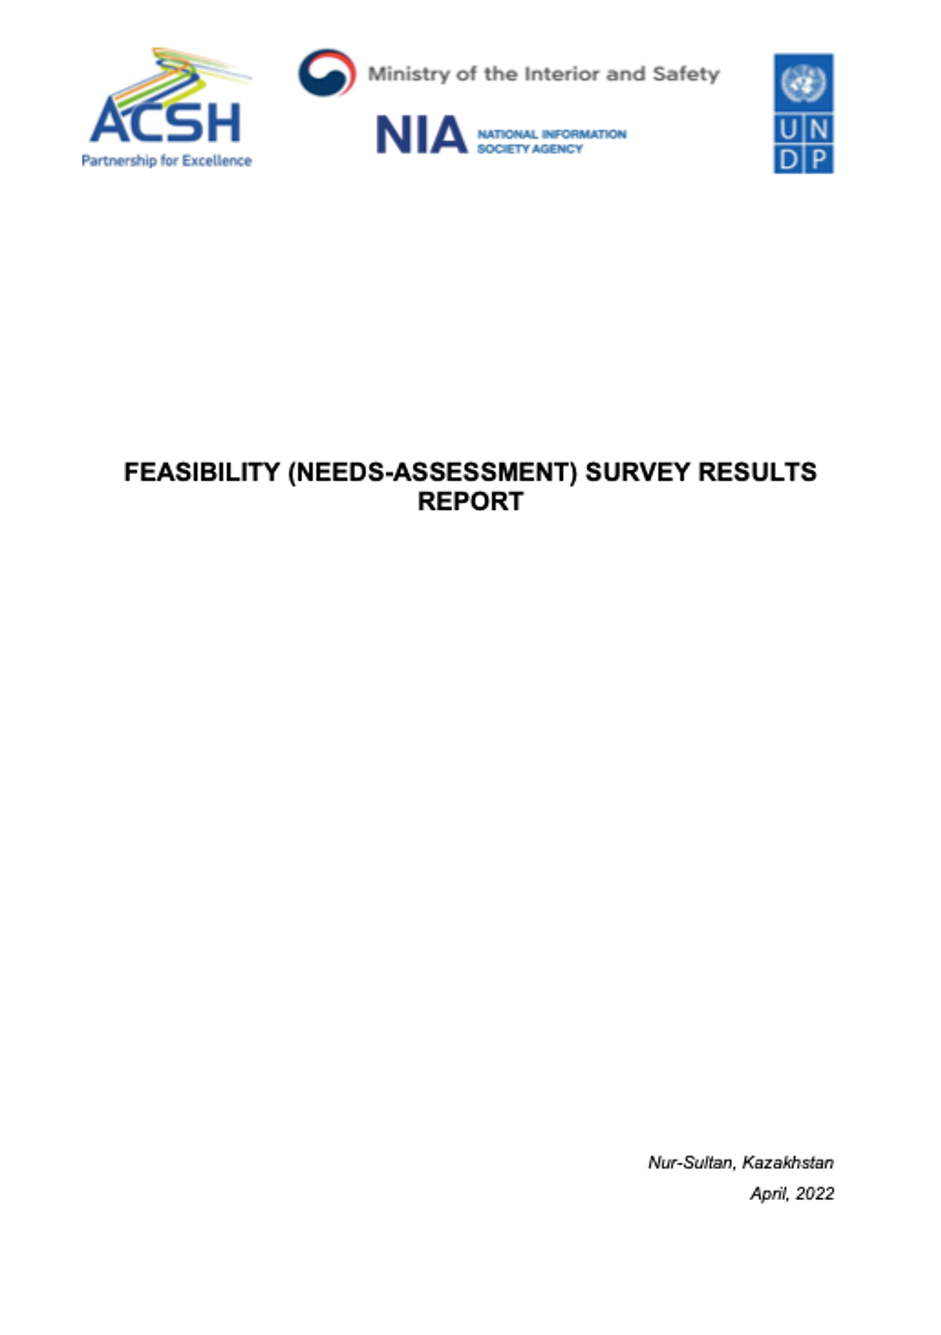 Feasibility (Needs-Assessment) Survey Results Report